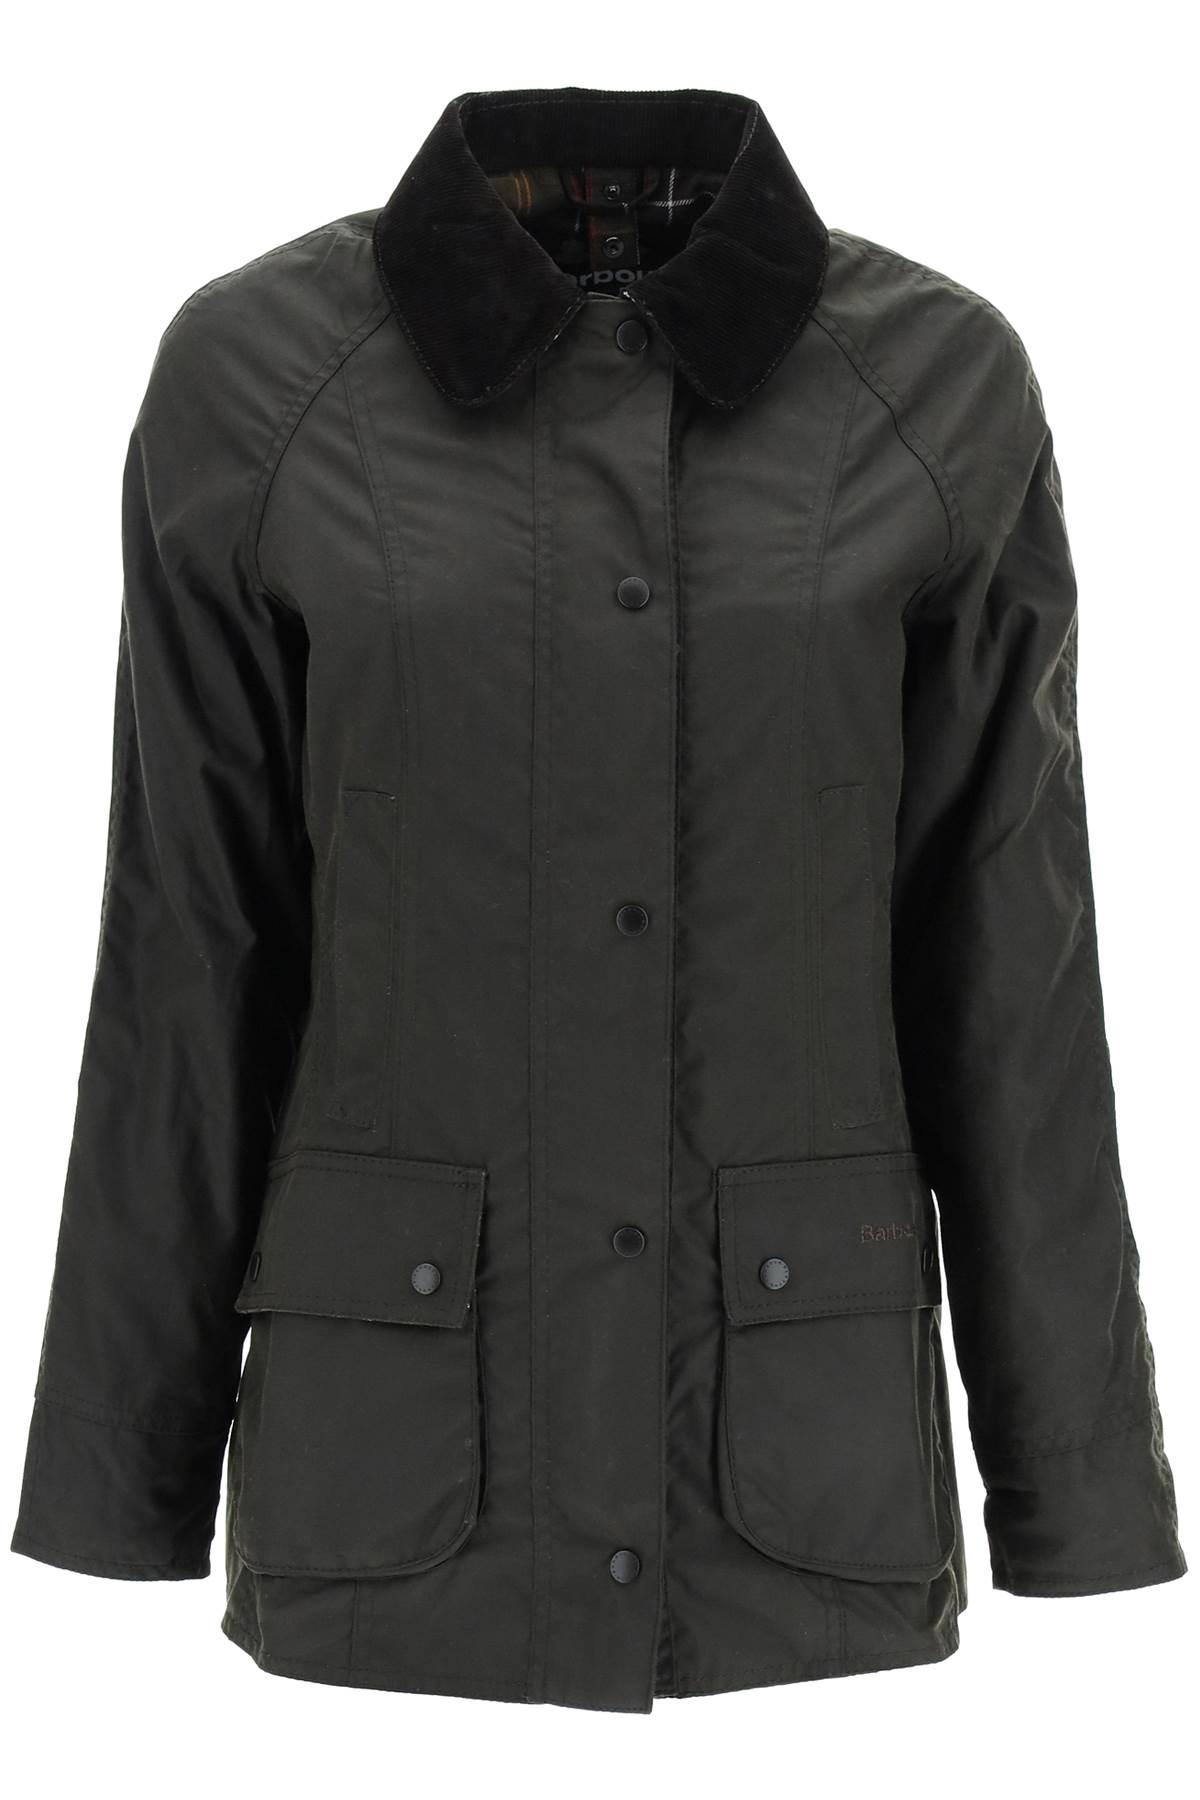 Barbour beadnell Wax Jacket